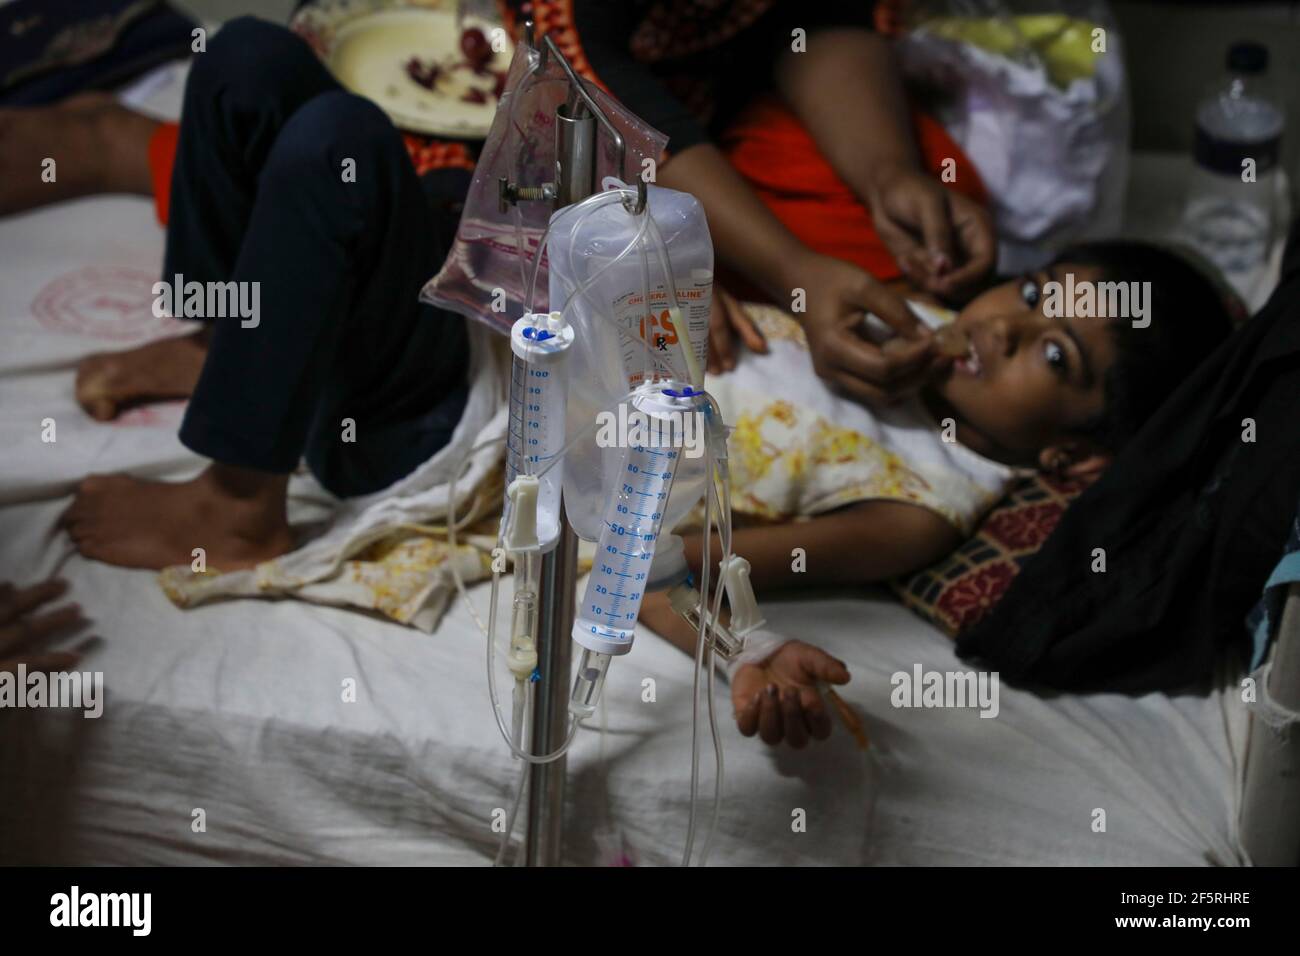 A tripod with infusion solutions beside a mosquito-borne viral dengue fever patient at a hospital in Dhaka, Bangladesh Stock Photo